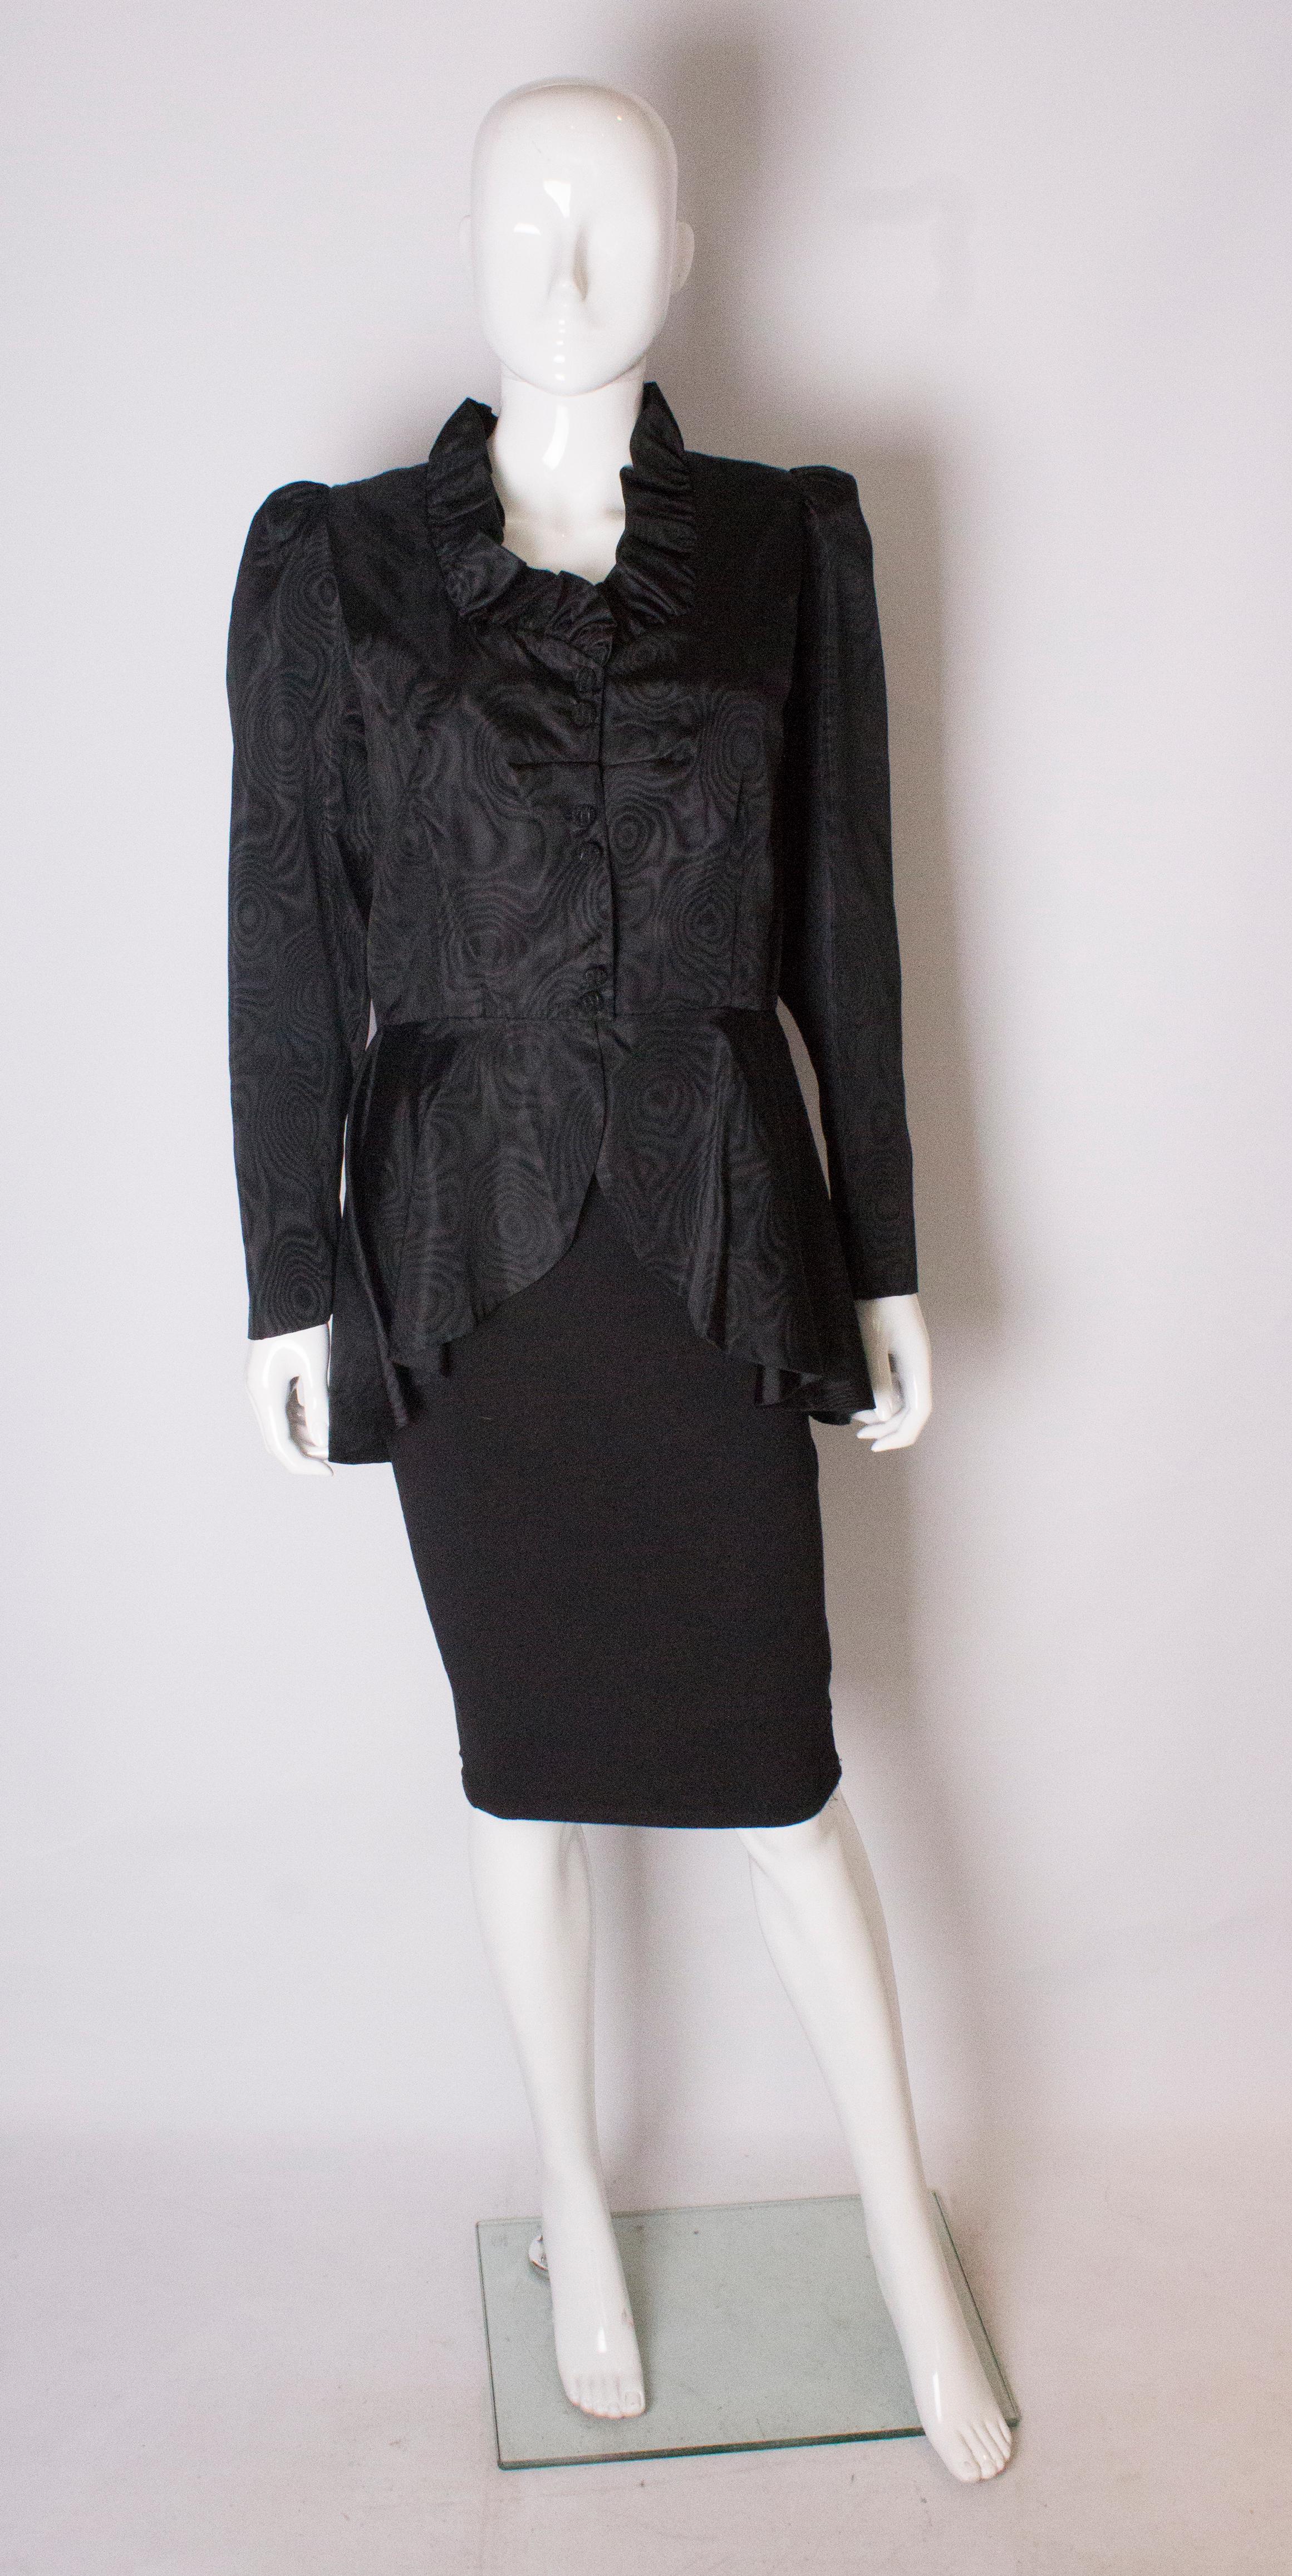 A chic black silk jacket . The jacket has a sweetheart neckline with frill trim, and a six button front opening, and two buttons on each cuff.
It has a wide peplum , and the length at the back is 33'' and 26'' at the front.